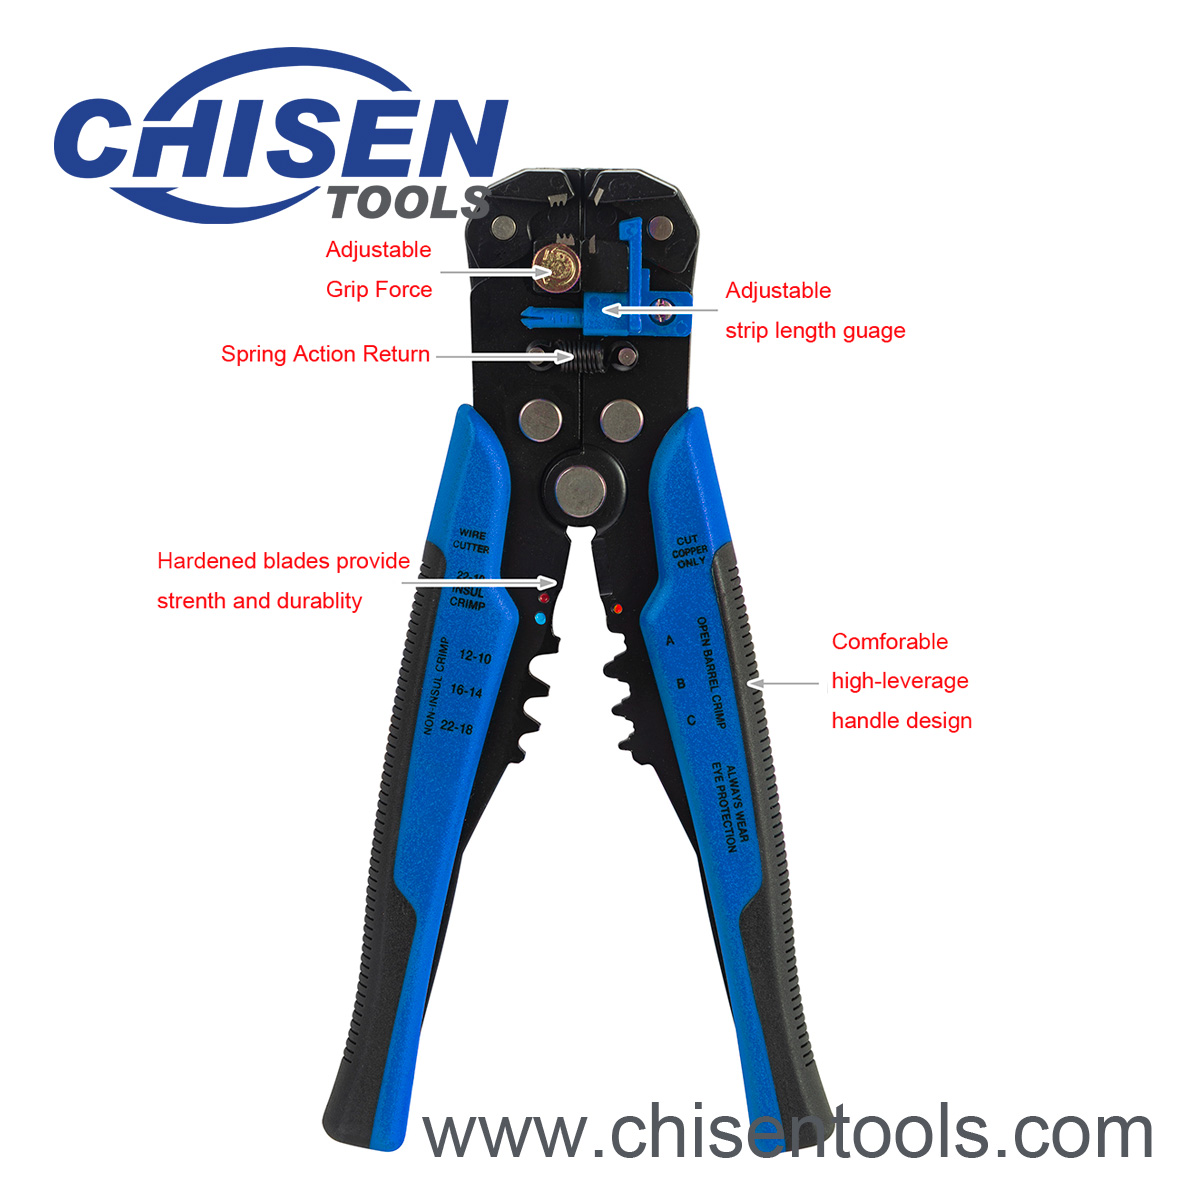 Ajsutable Automatic Wire Stripper's Features